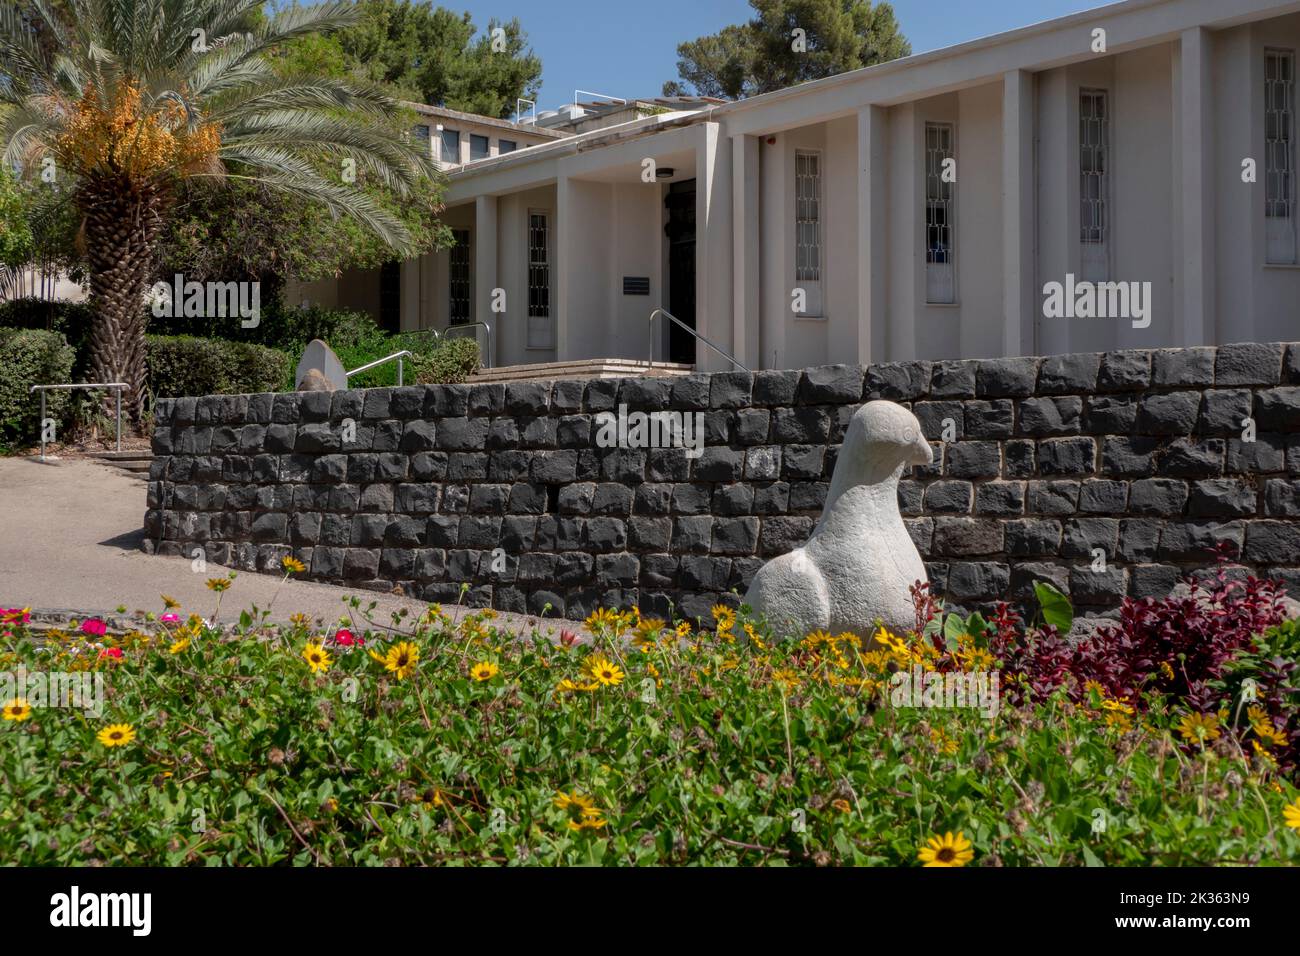 Exterior of Mishkan Museum of Art located on the grounds of Kibbutz Ein Harod Meuhad in Israel. The museum was designed by architect Samuel Bickels, inaugurated in 1948 and was the first rural museum run by a kibbutz. Stock Photo